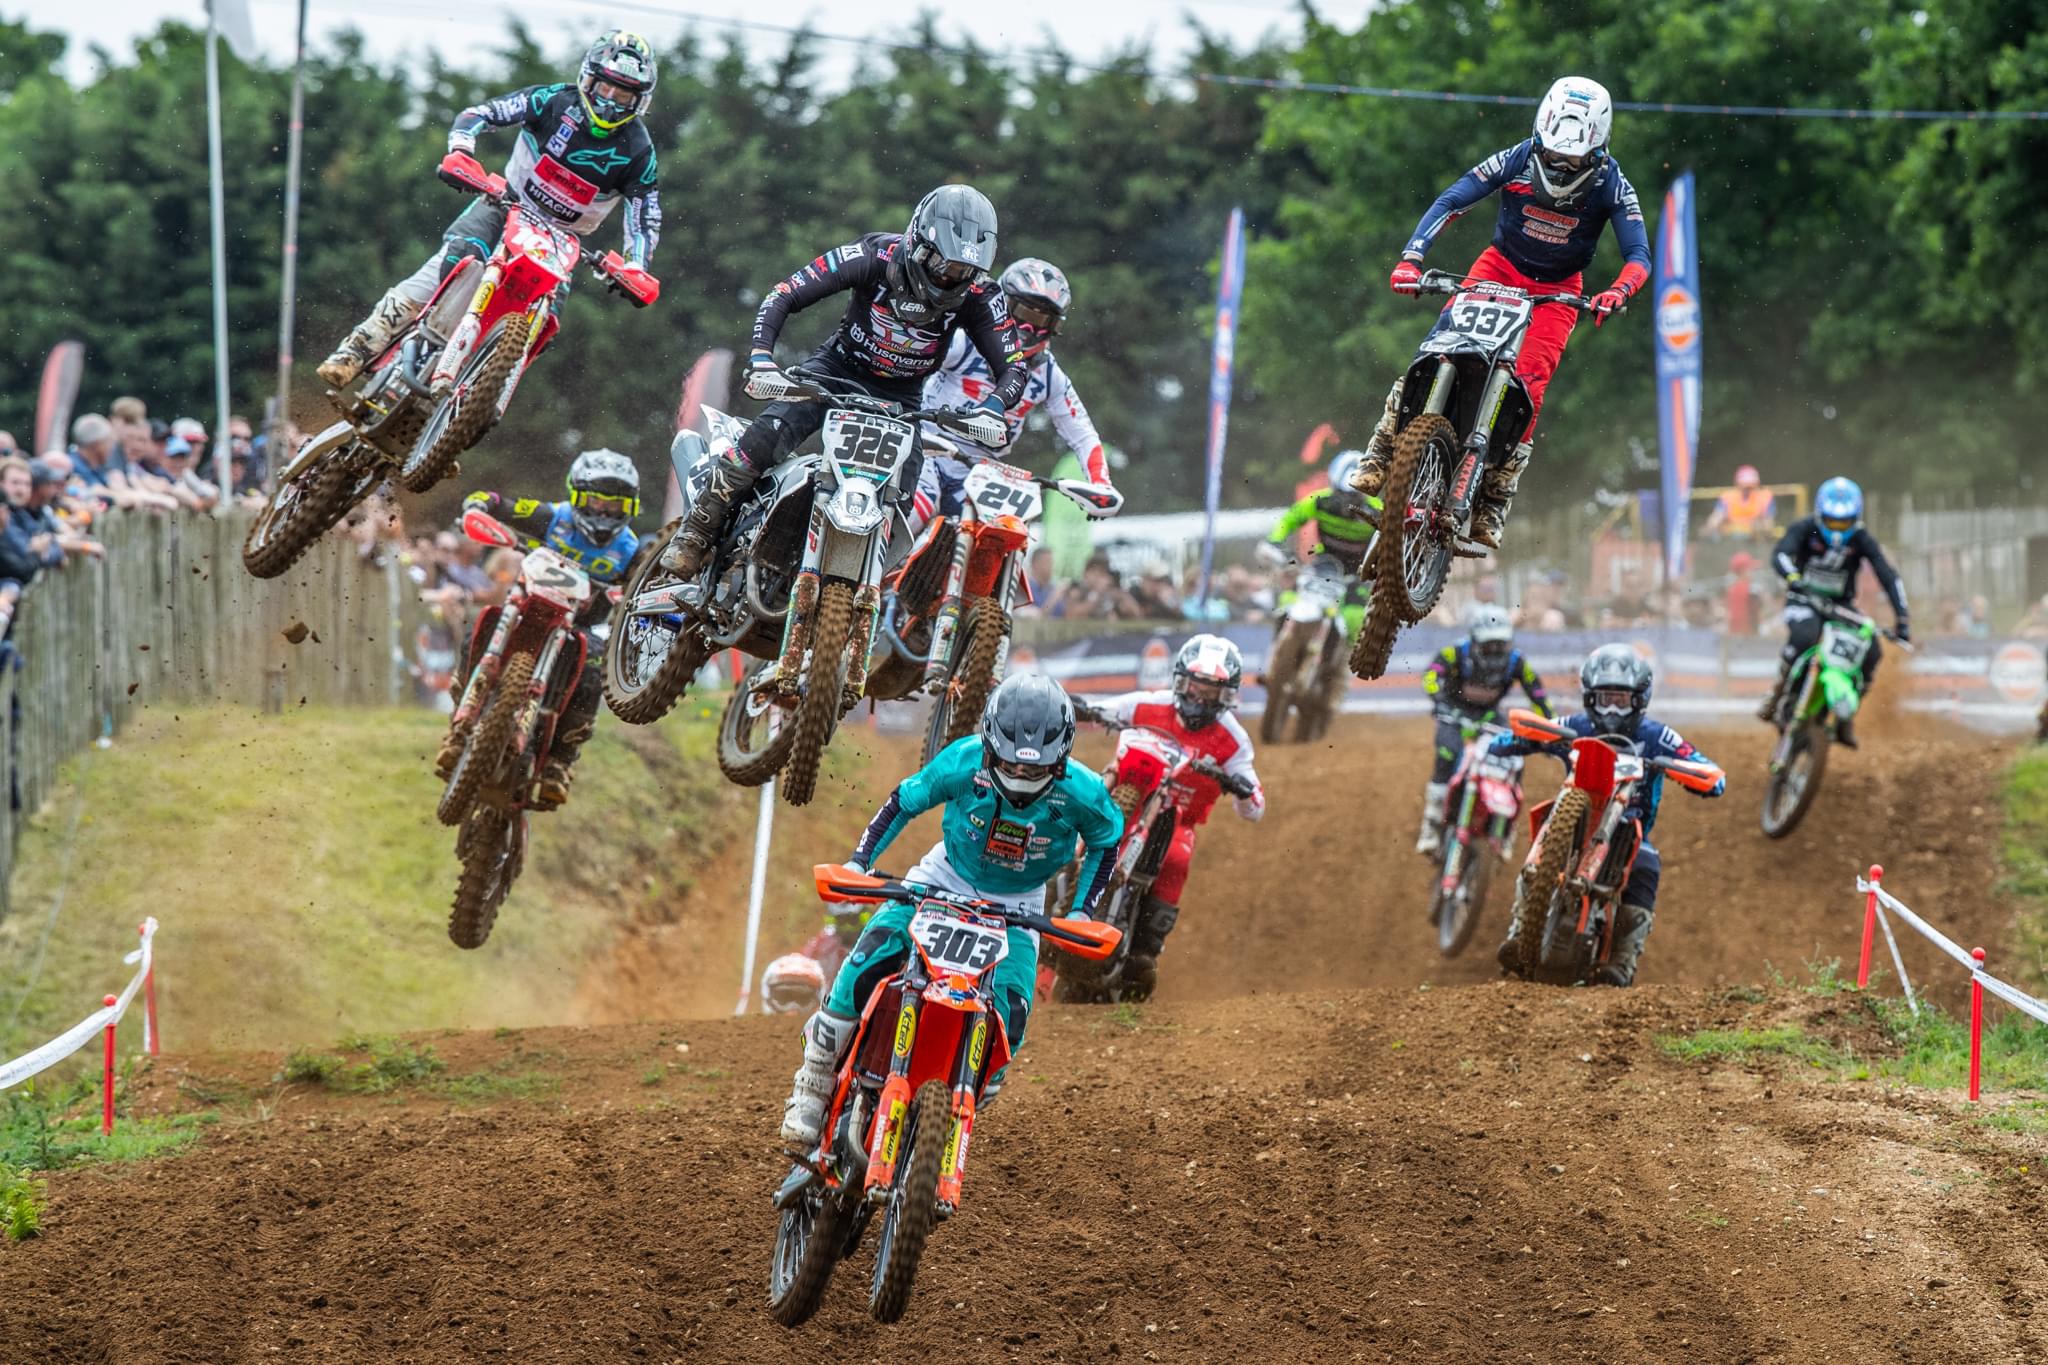 Blaxhall British Championship – Entry Lists and more